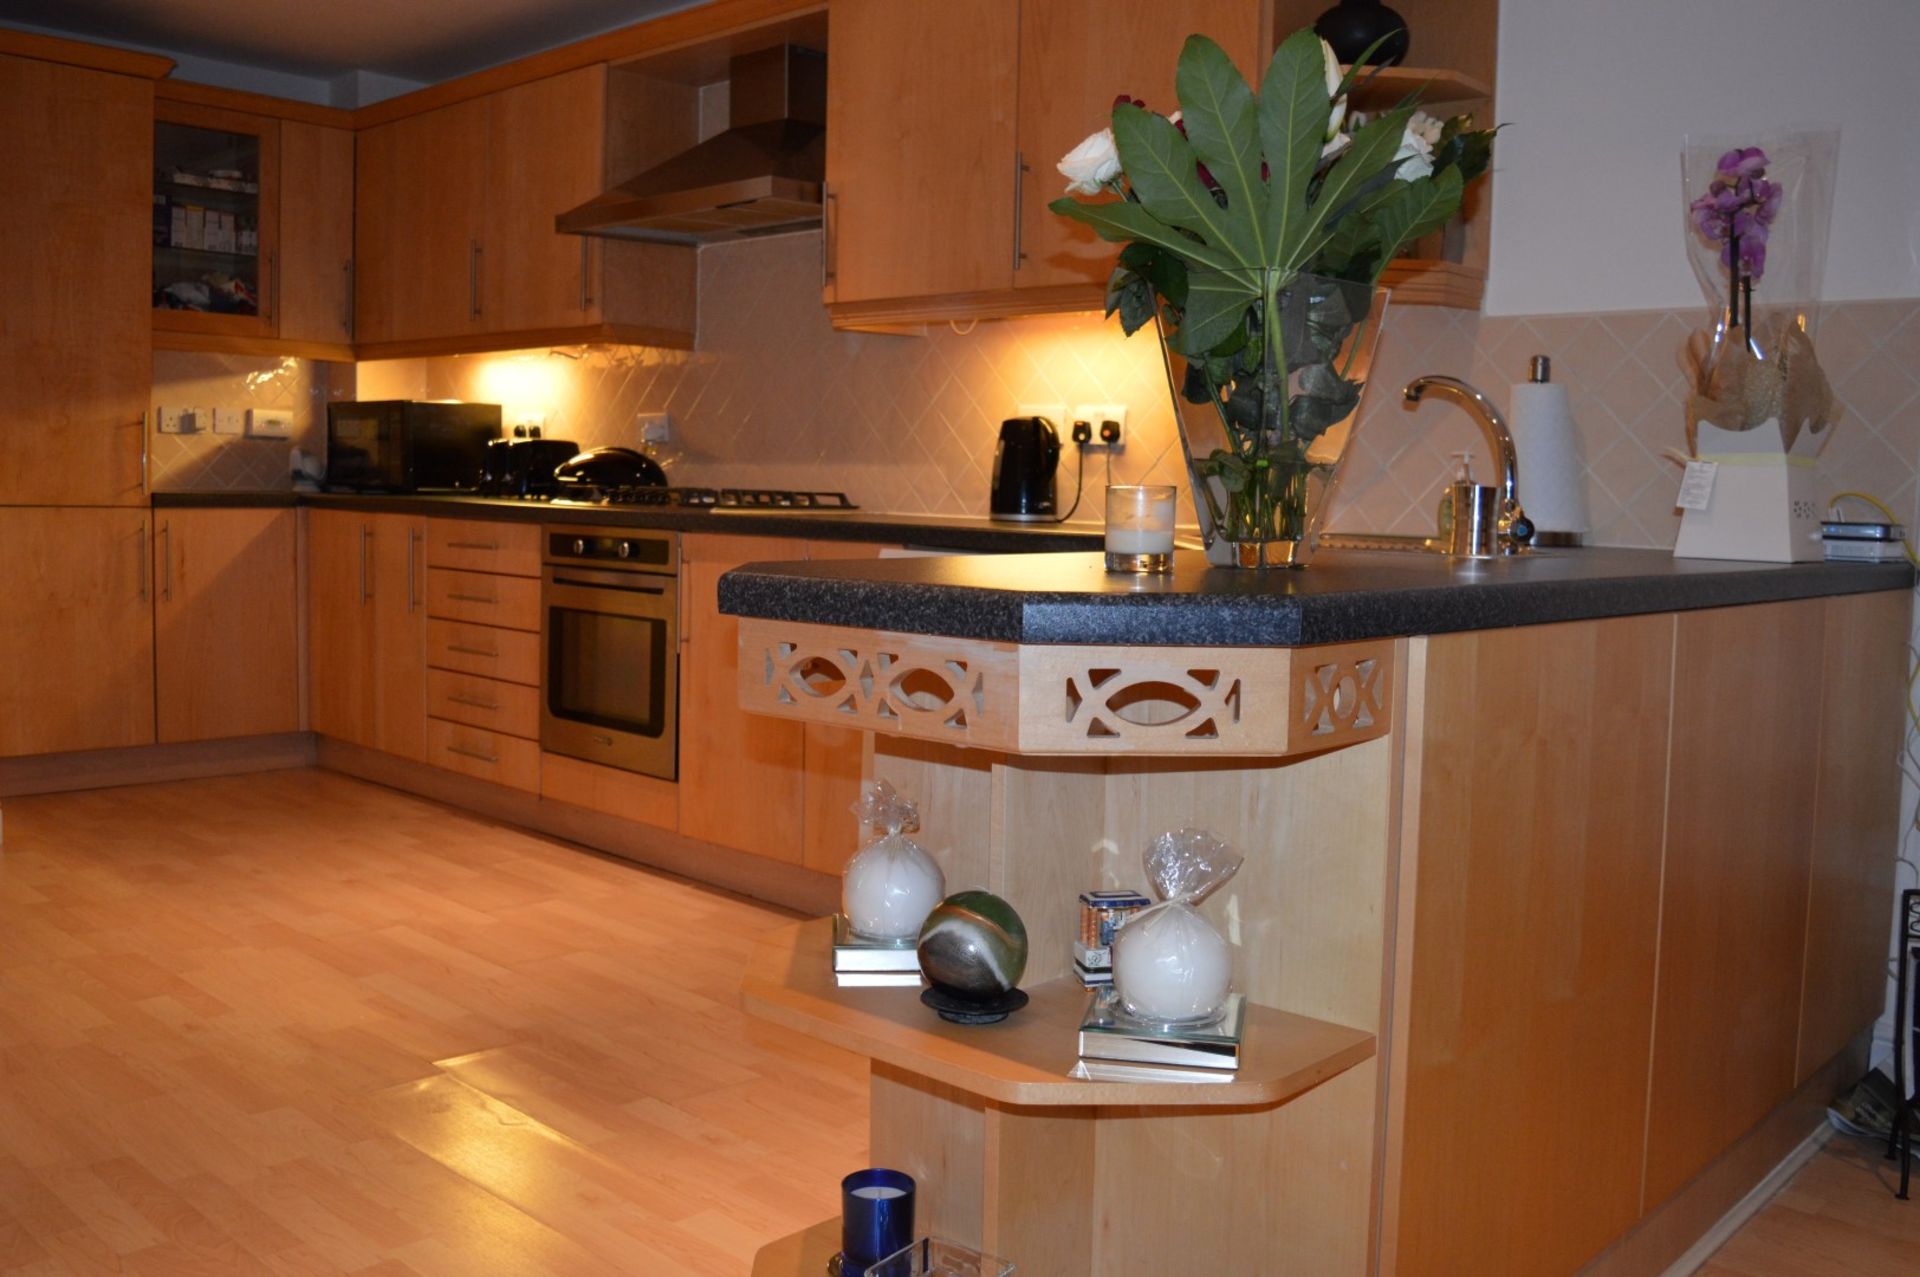 1 x Manor Cabinet Company Fitted Kitchen - Contemporary Beech Finish With Black Worktops and